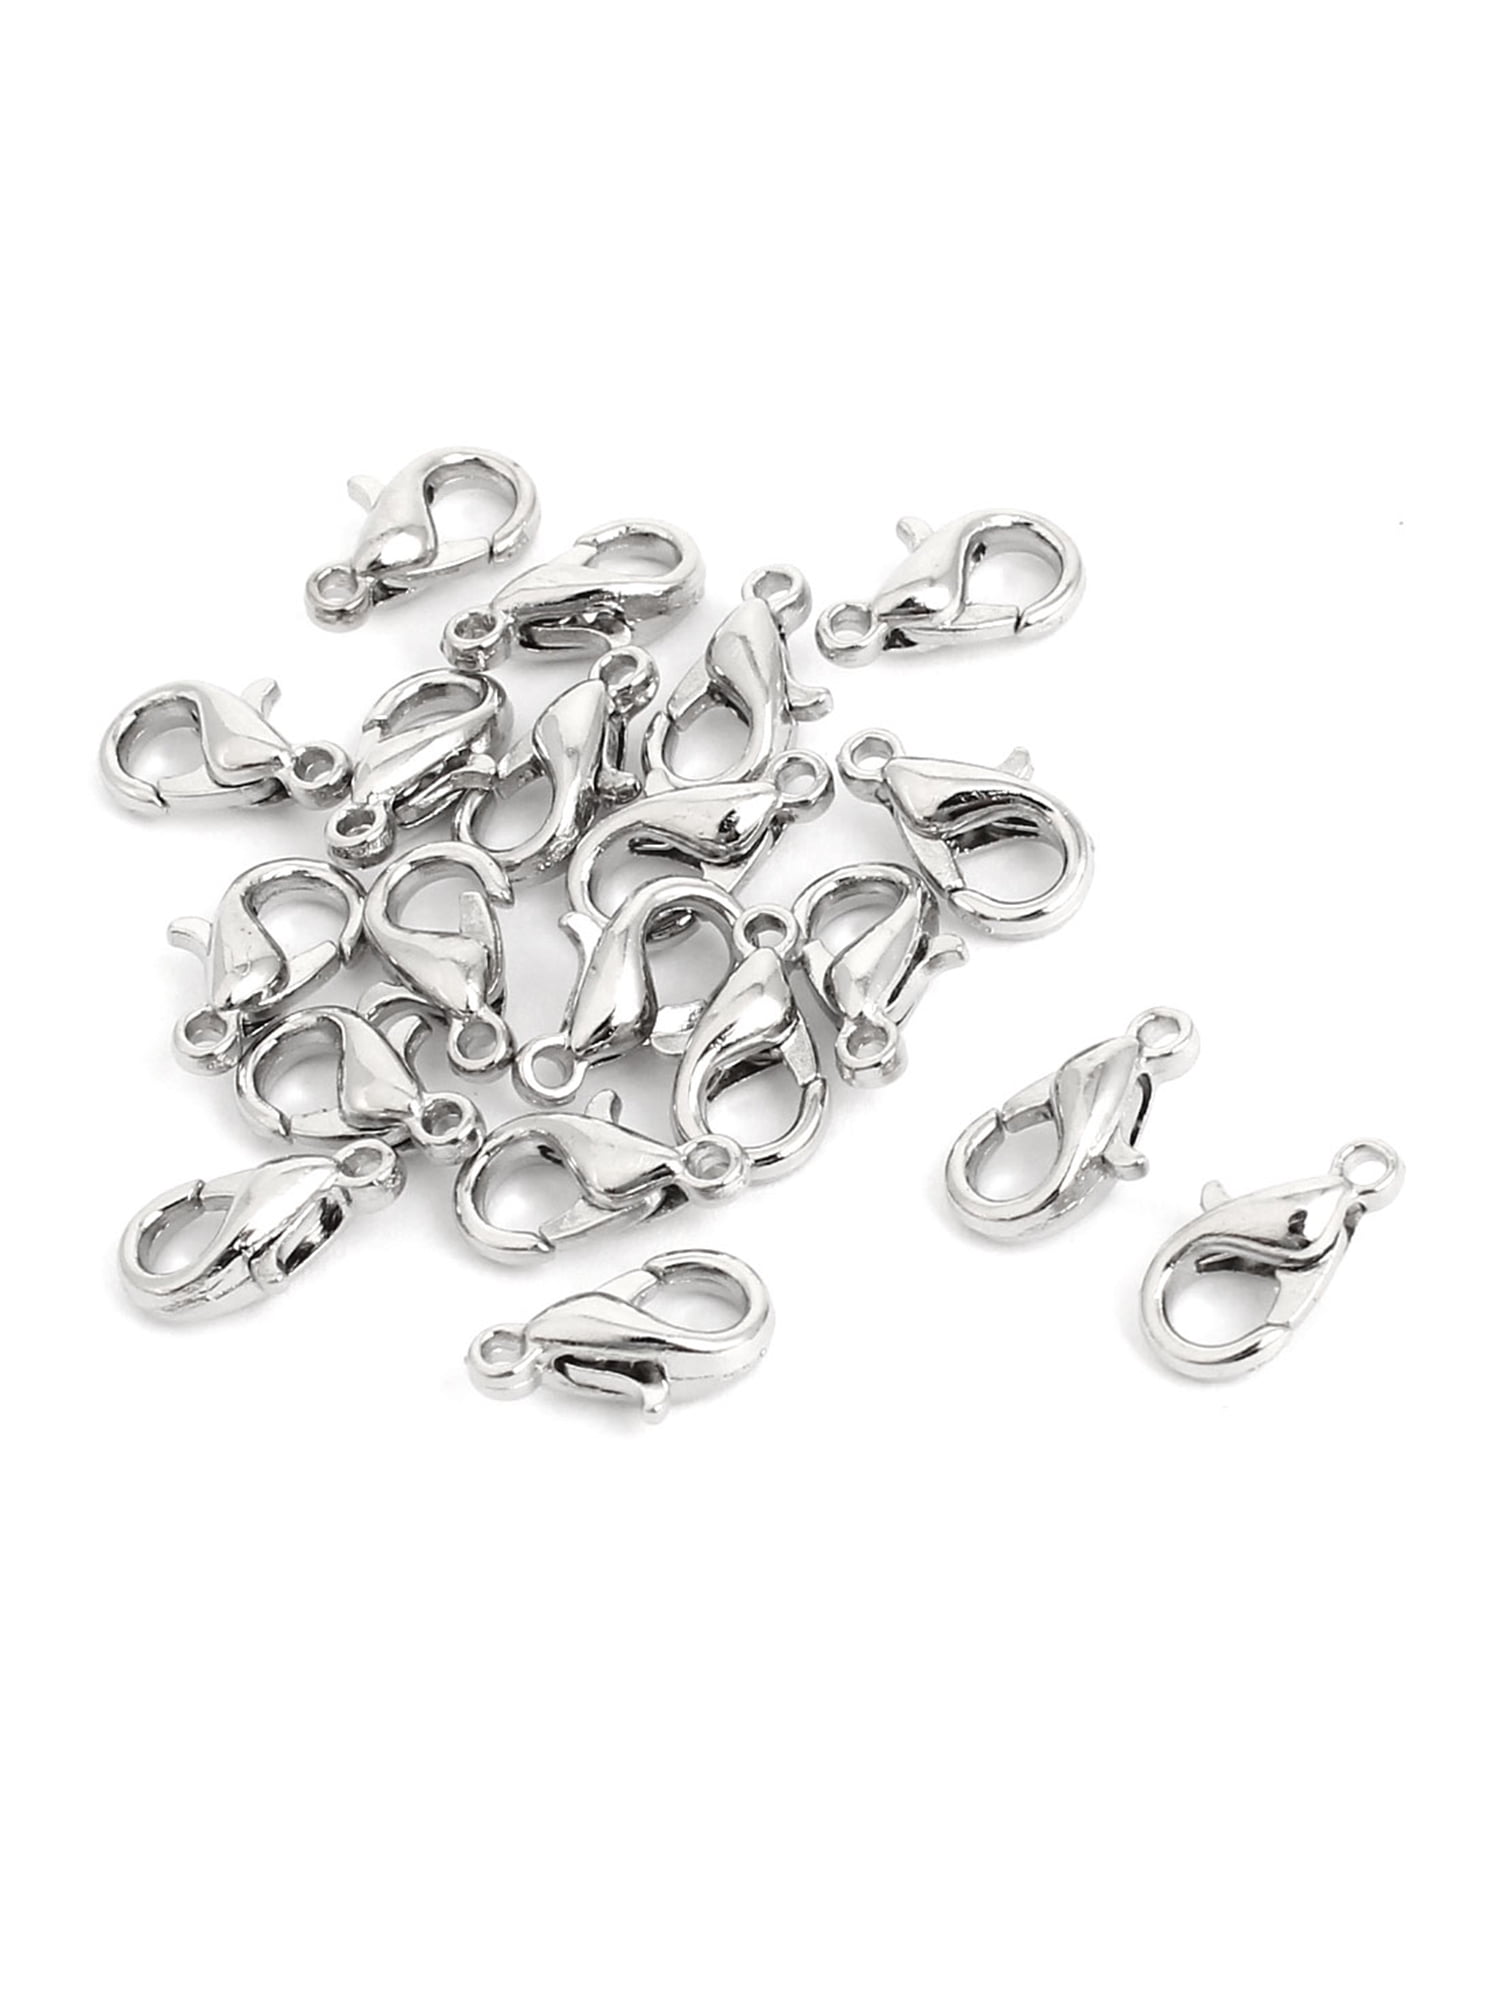 300 Pcs Lobster Clasps 12mm Necklace Lobster Claw Clasp with 2mm Eyelet Jewelry Making Accessories for DIY Earring Necklace Bracelet